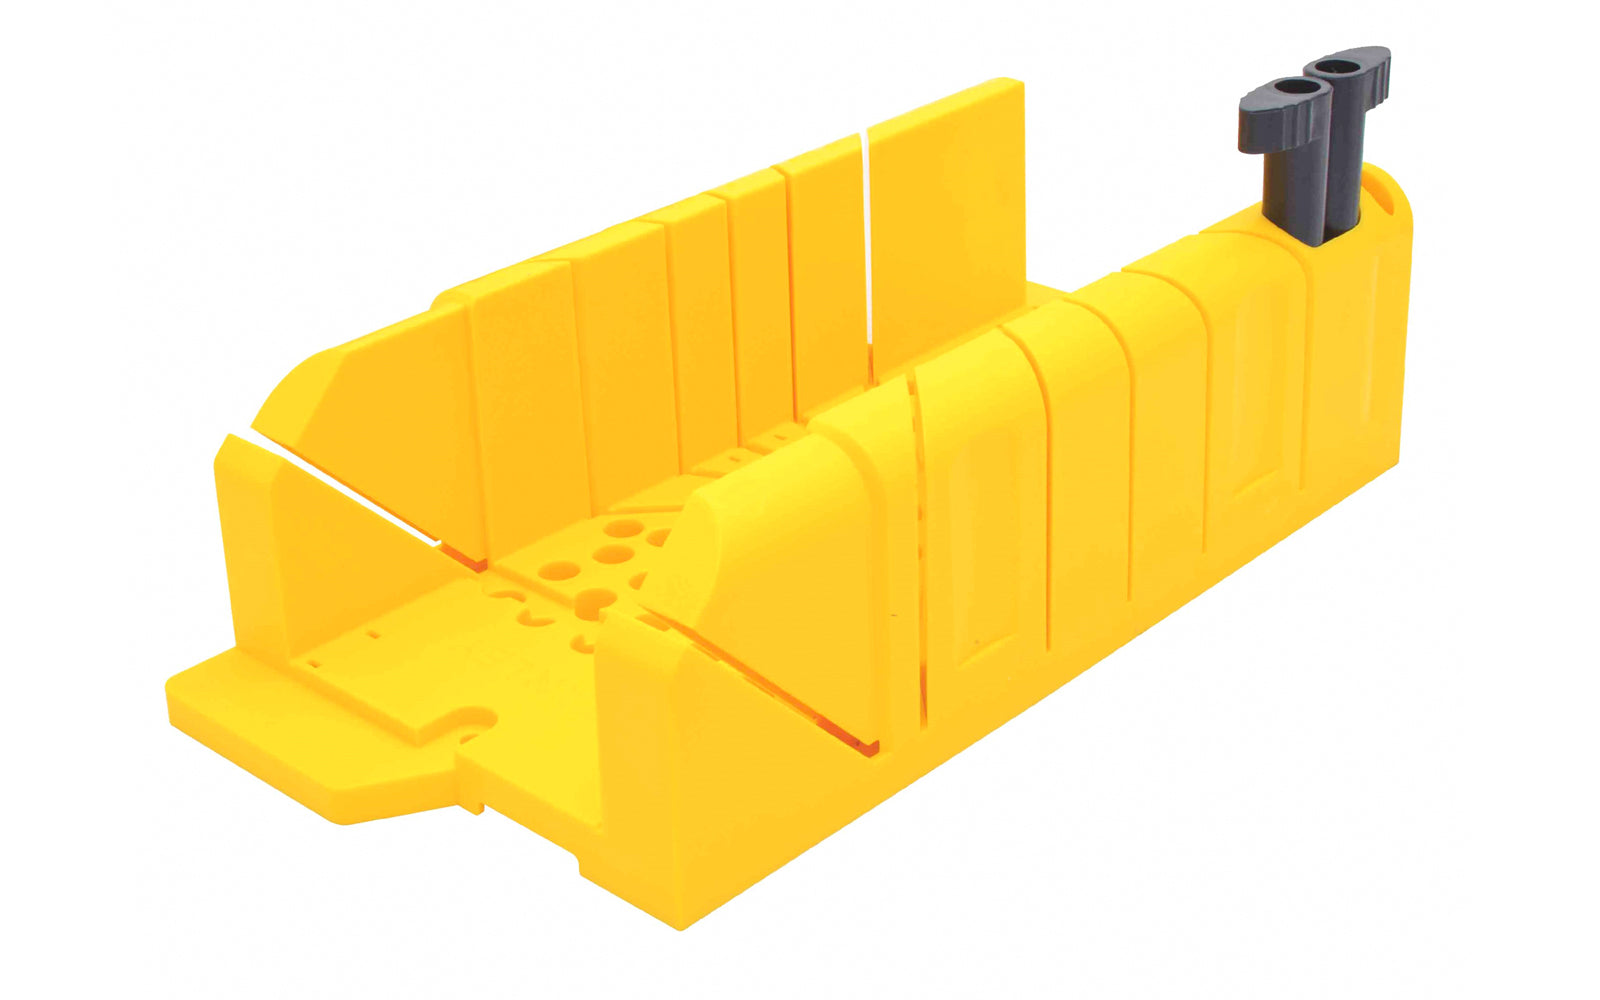 Stanley 20-112 Clamping Miter Box